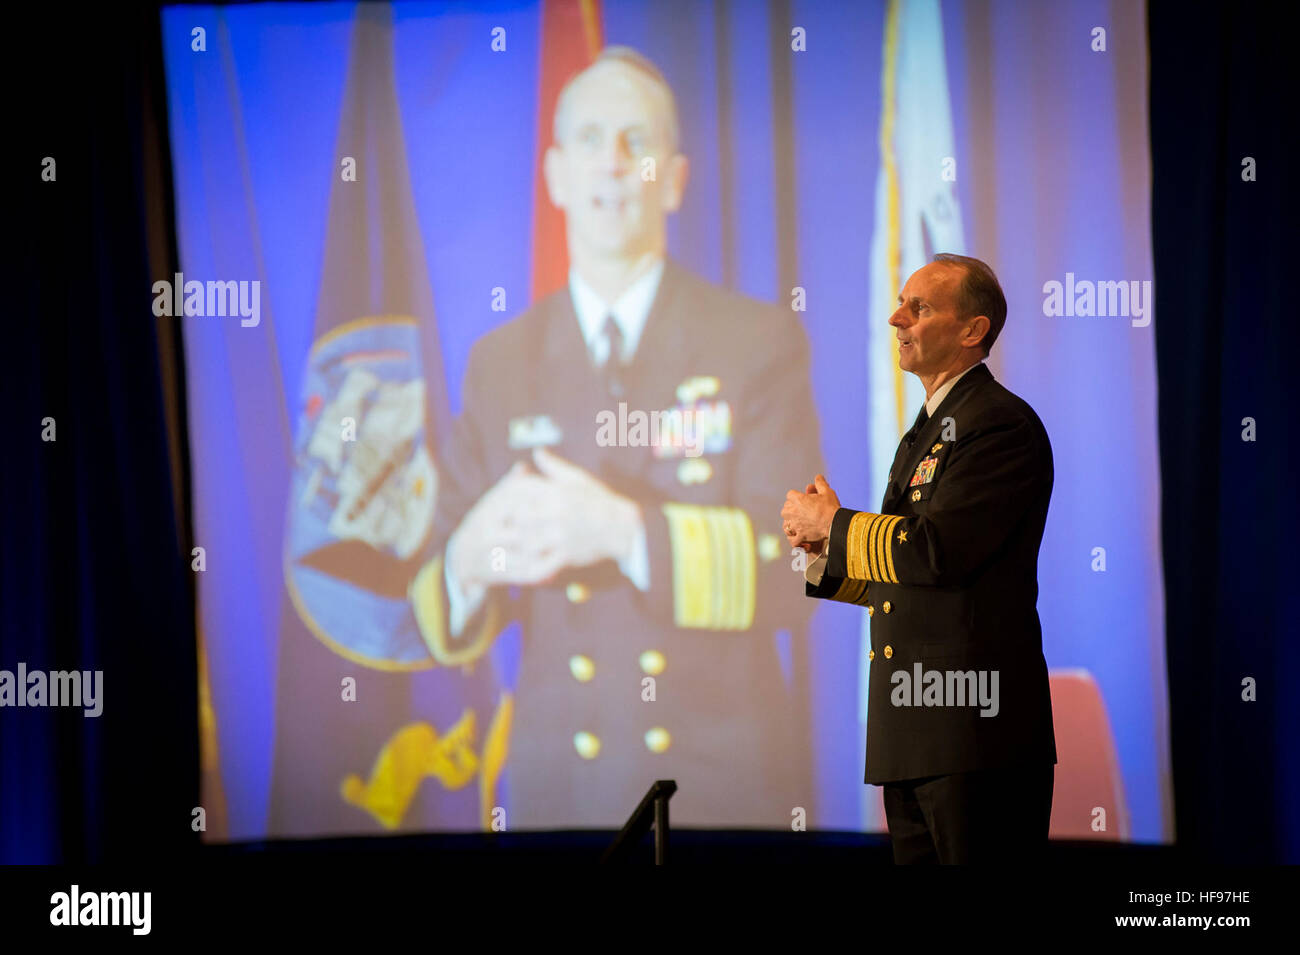 ARLINGTON, Va. (Feb. 21, 2013) Chief of Naval Operations (CNO) Adm. Jonathan Greenert speaks to members of the American Society of Naval Engineers (ANSE) about advances in warfighting technology and techniques and how shipbuilders should incorporate those concepts as they forge ahead with new designs to compliment the modern maritime strategy. (U.S. Navy photo by Mass Communication Specialist 1st Class Peter D. Lawlor/Released) 130221-N-WL435-199  Join the conversation http://www.facebook.com/USNavy http://www.twitter.com/USNavy http://navylive.dodlive.mil CNO Adm. Greenert speaks to engineers Stock Photo